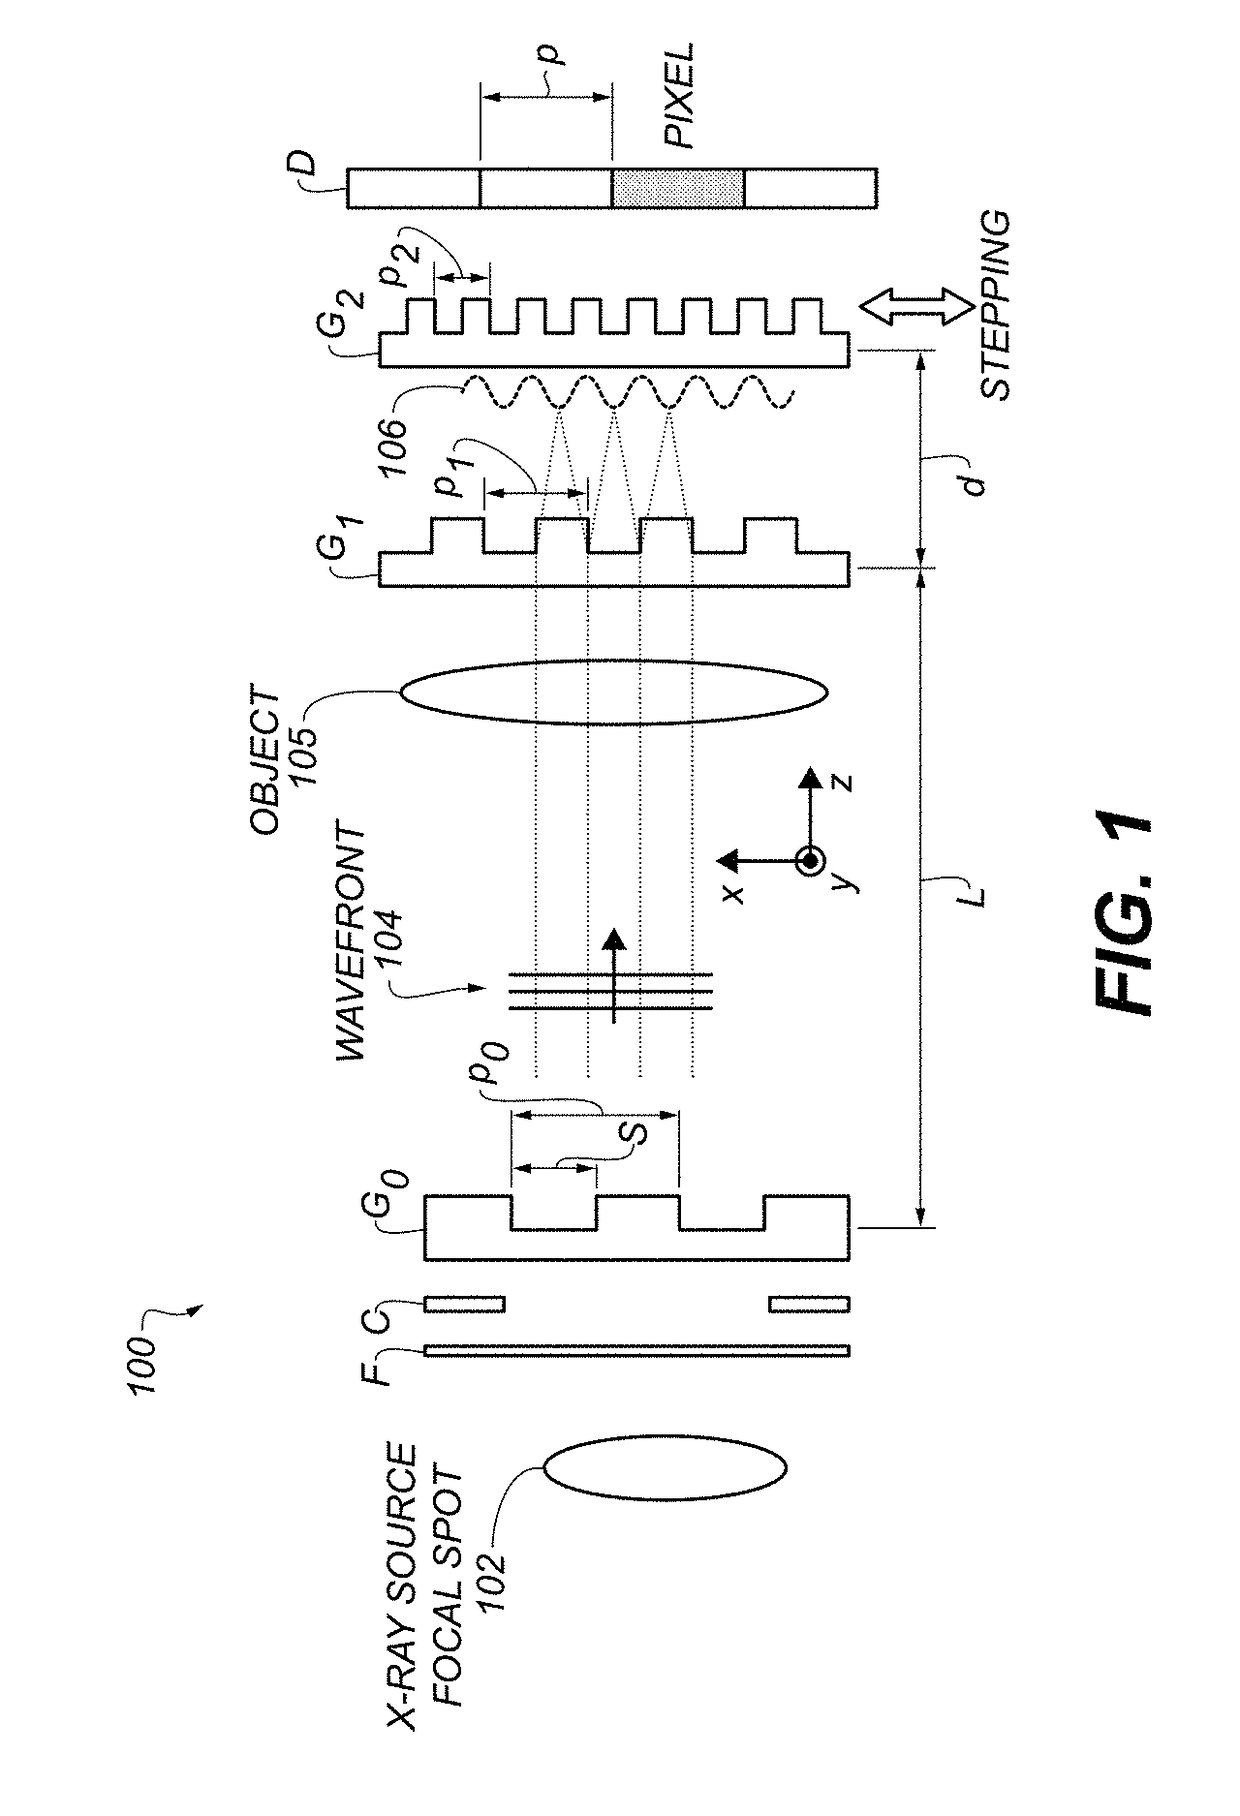 Method and apparatus for fabrication and tuning of grating-based differential phase contrast imaging system